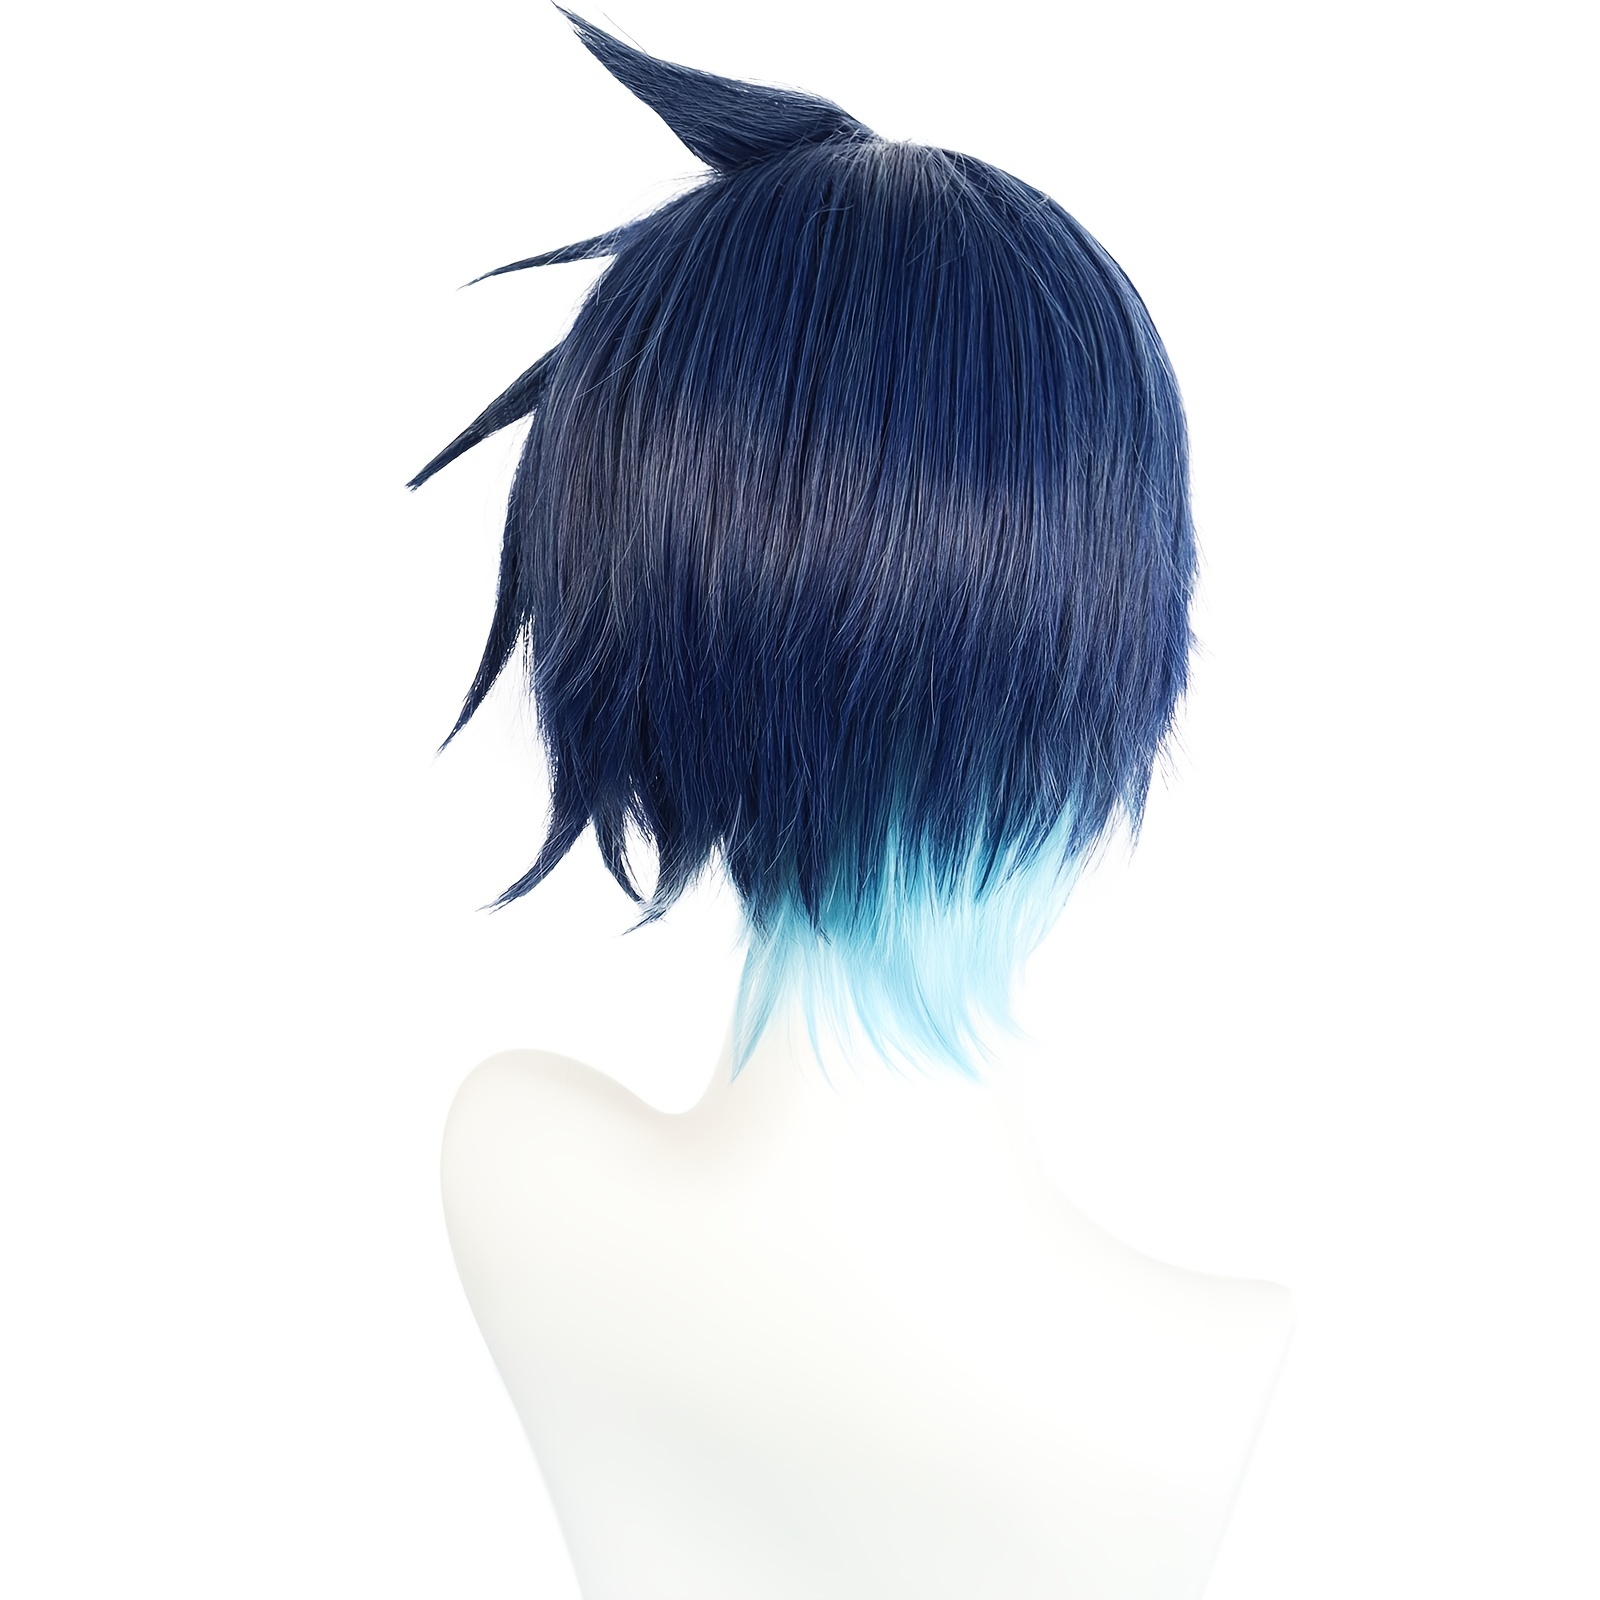 SHOP NOW] High Quality Anime Cosplay wigs | The Mad Shop